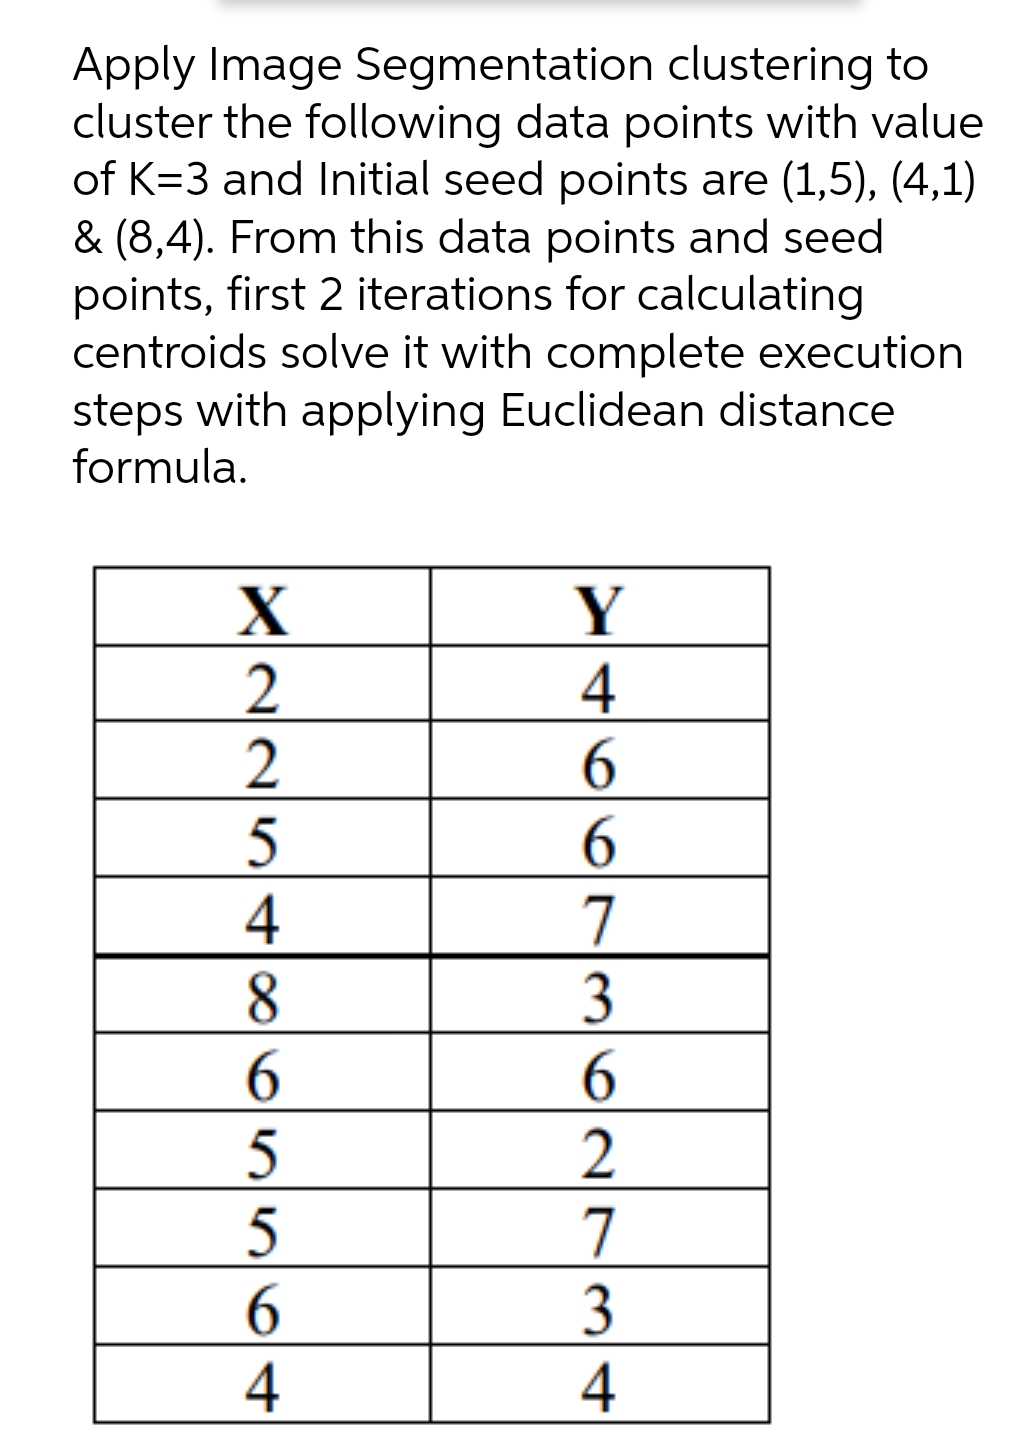 Apply Image Segmentation clustering to
cluster the following data points with value
of K=3 and Initial seed points are (1,5), (4,1)
& (8,4). From this data points and seed
points, first 2 iterations for calculating
centroids solve it with complete execution
steps with applying Euclidean distance
formula.
X
Y
4
6.
6.
7
3
6.
2
7
3
4
4
8.
6.
5
6.
4
